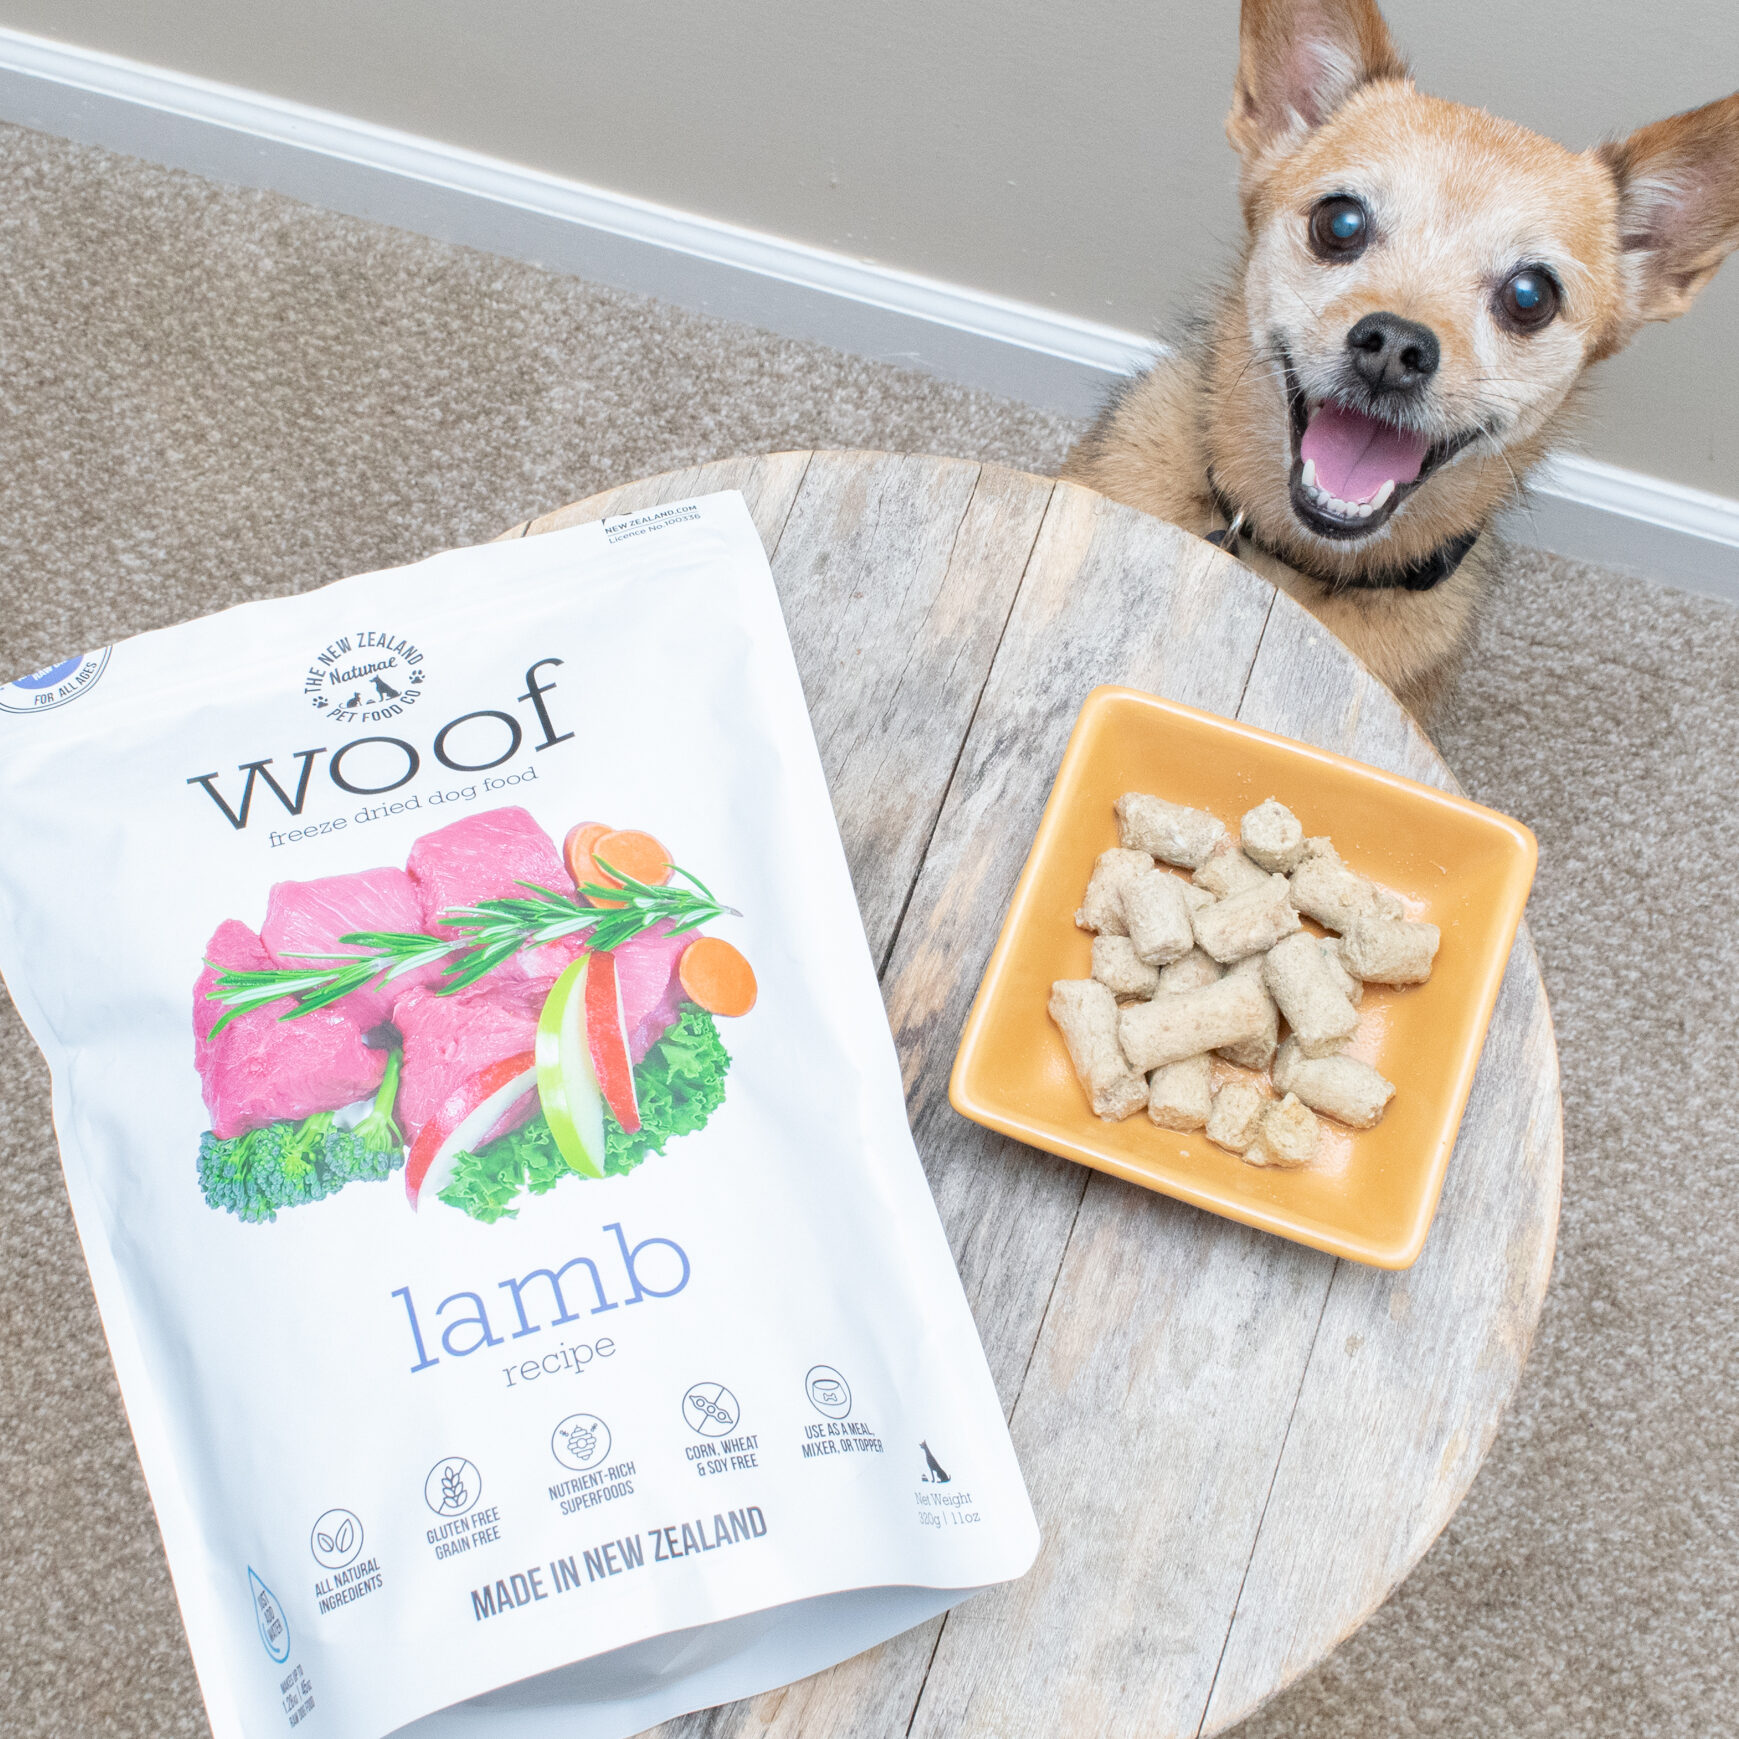 My dog with his sack of Woof Freeze-Dried Dog Food – Lamb